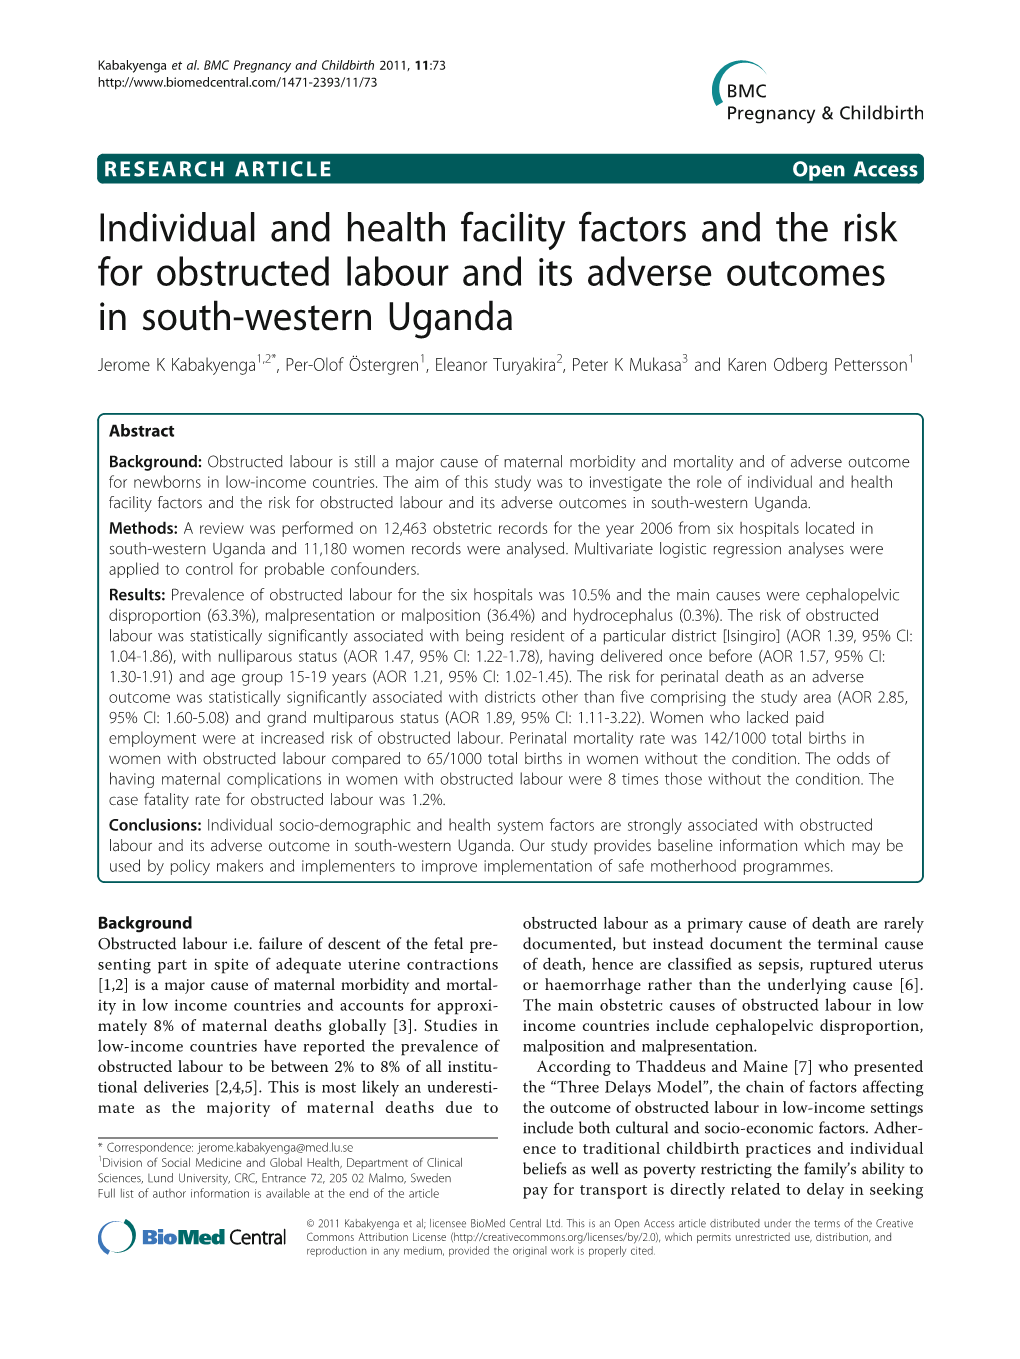 Individual and Health Facility Factors and the Risk For